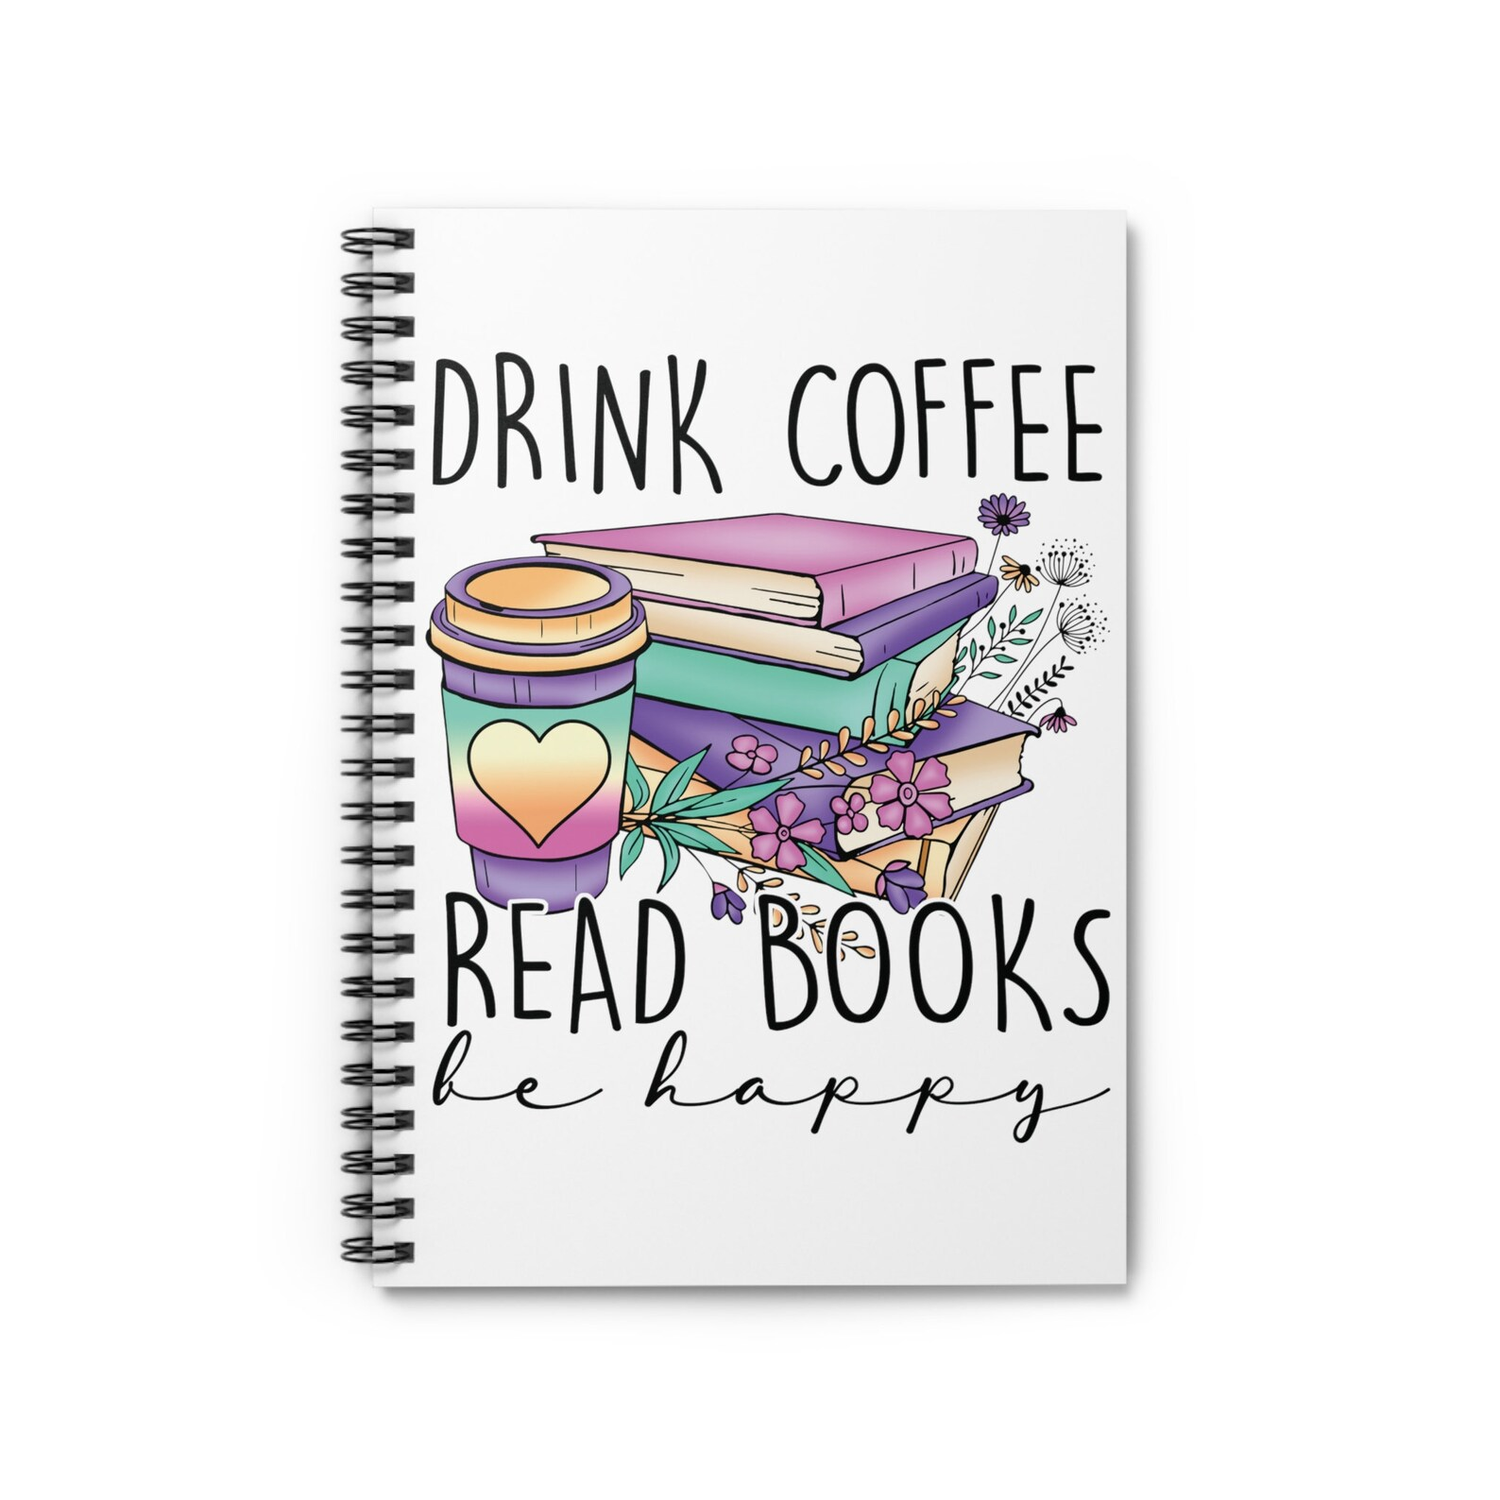 Drink Coffee Read Books Journals and Diaries by TheGlassyLass.com